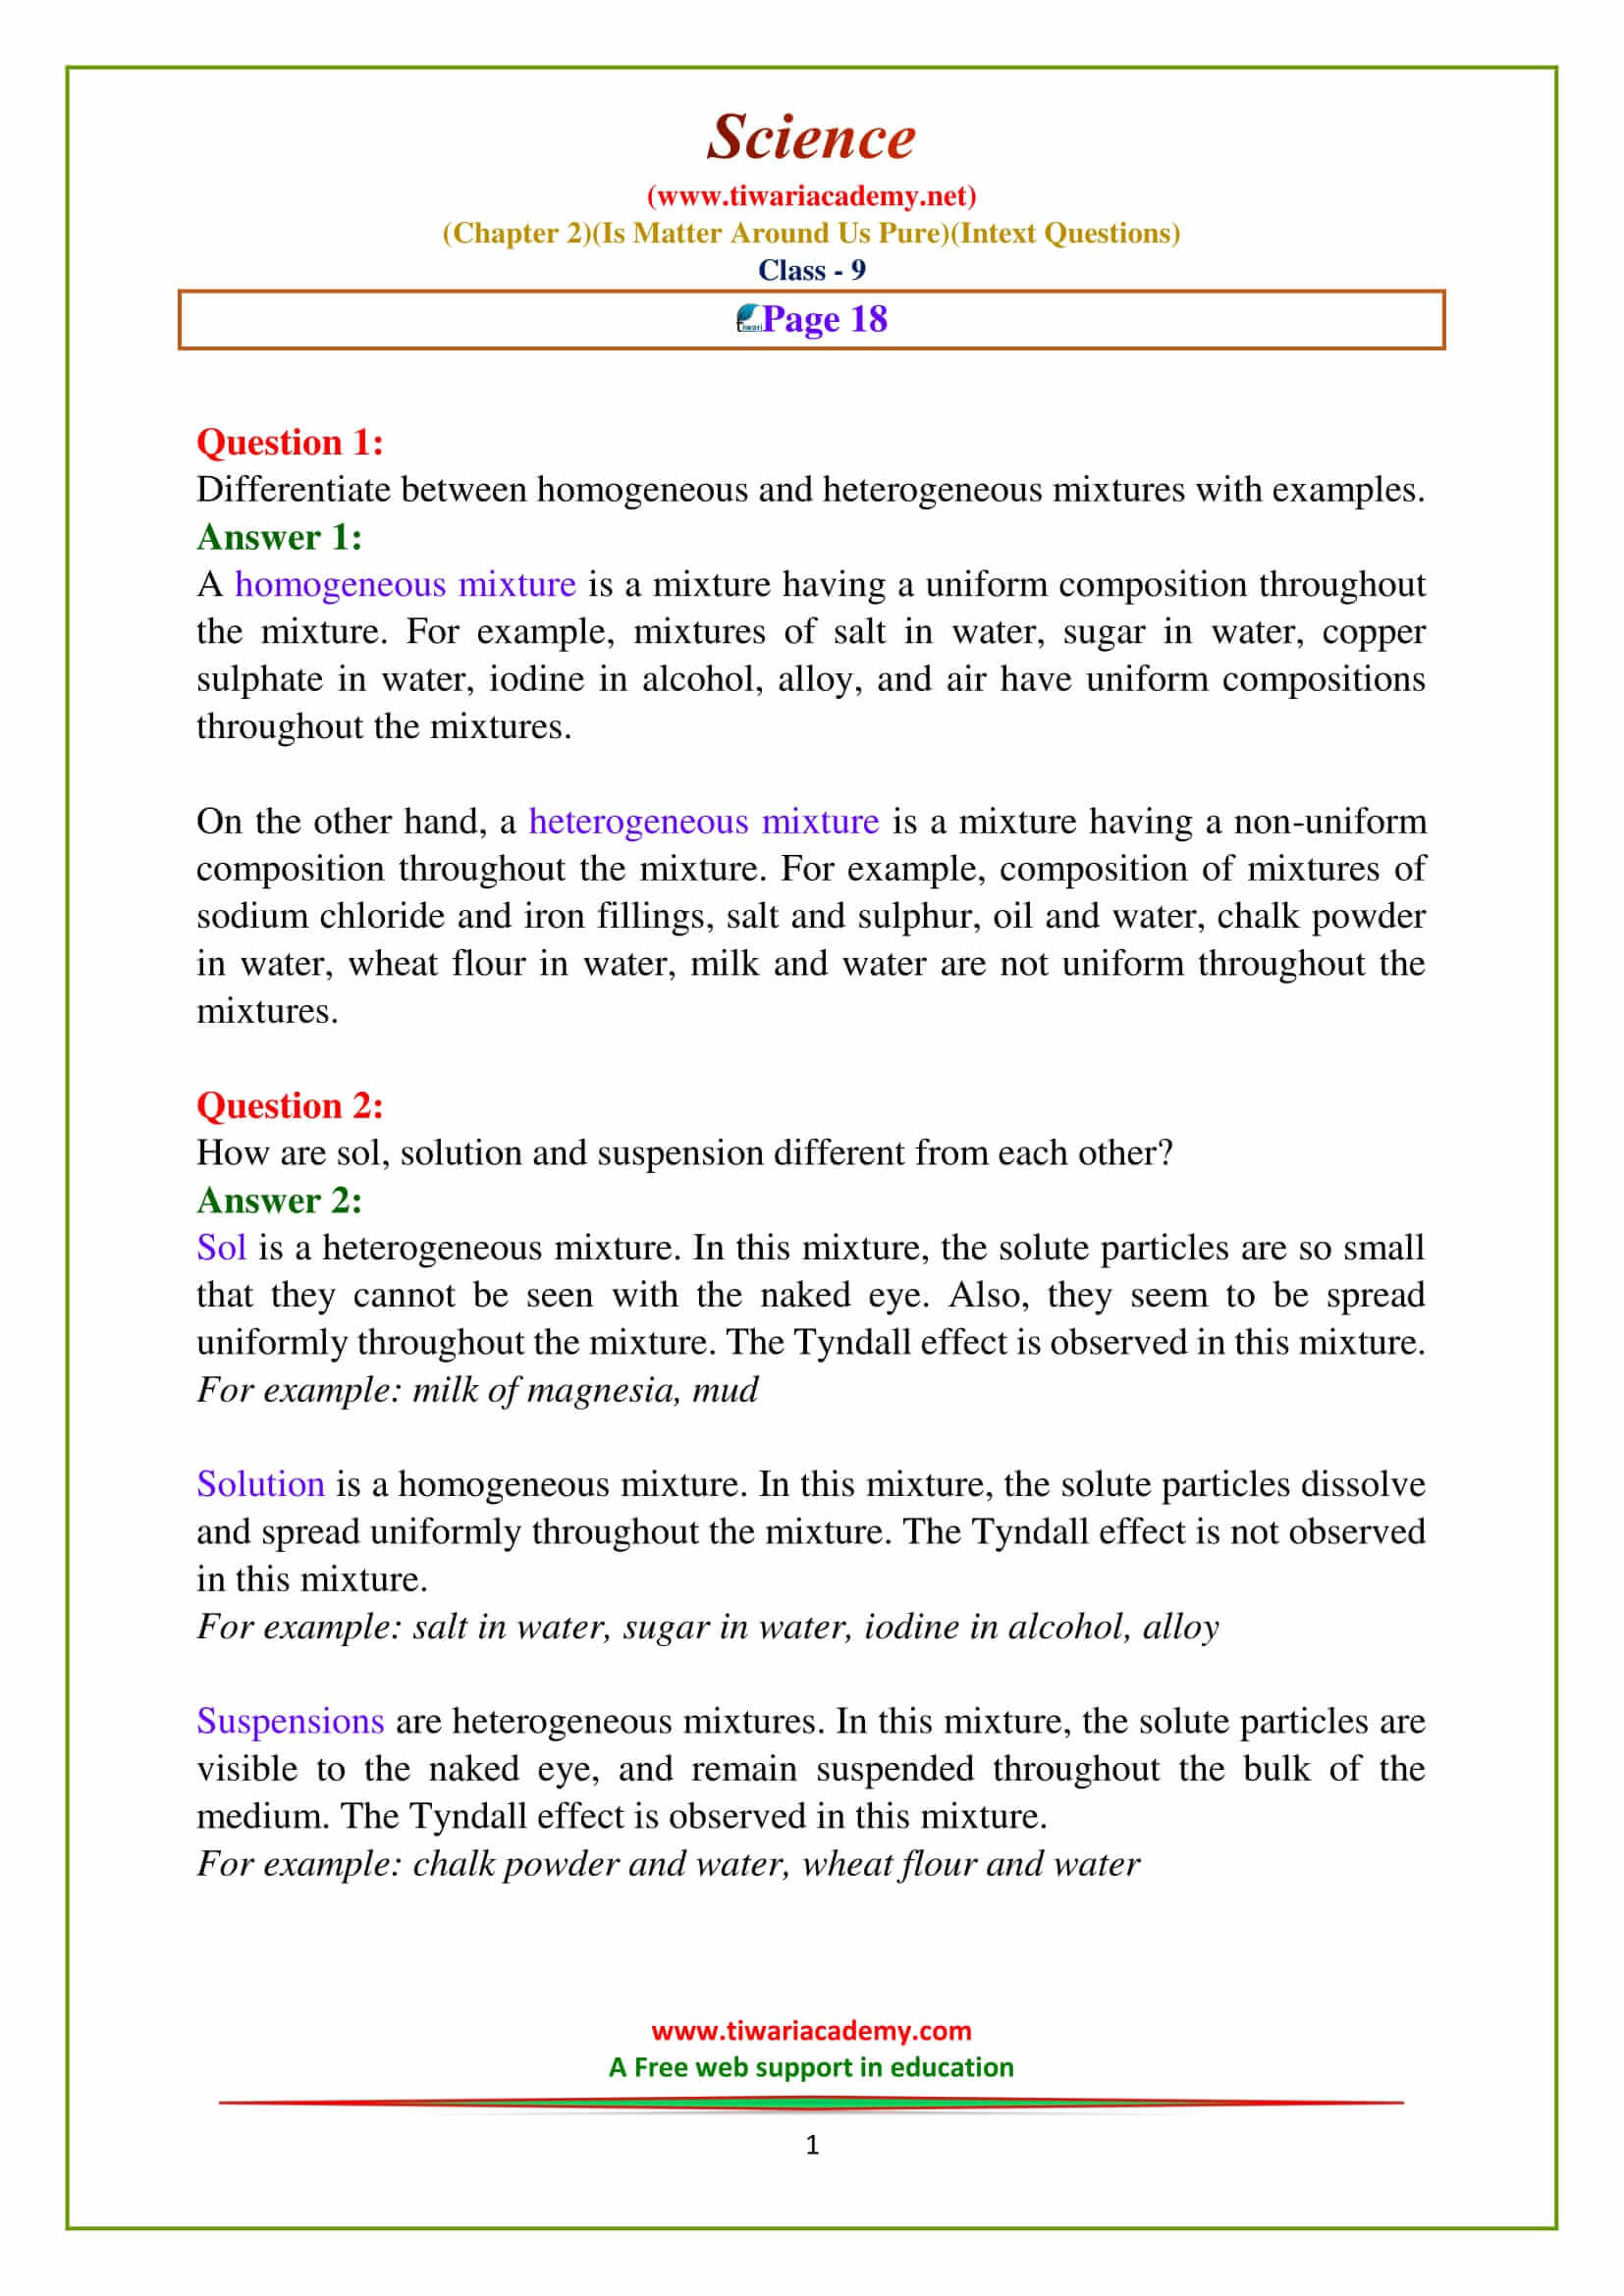 NCERT Solutions for Class 9 Science Chapter 2 Is Matter Around Us Pure page 18 questions answres